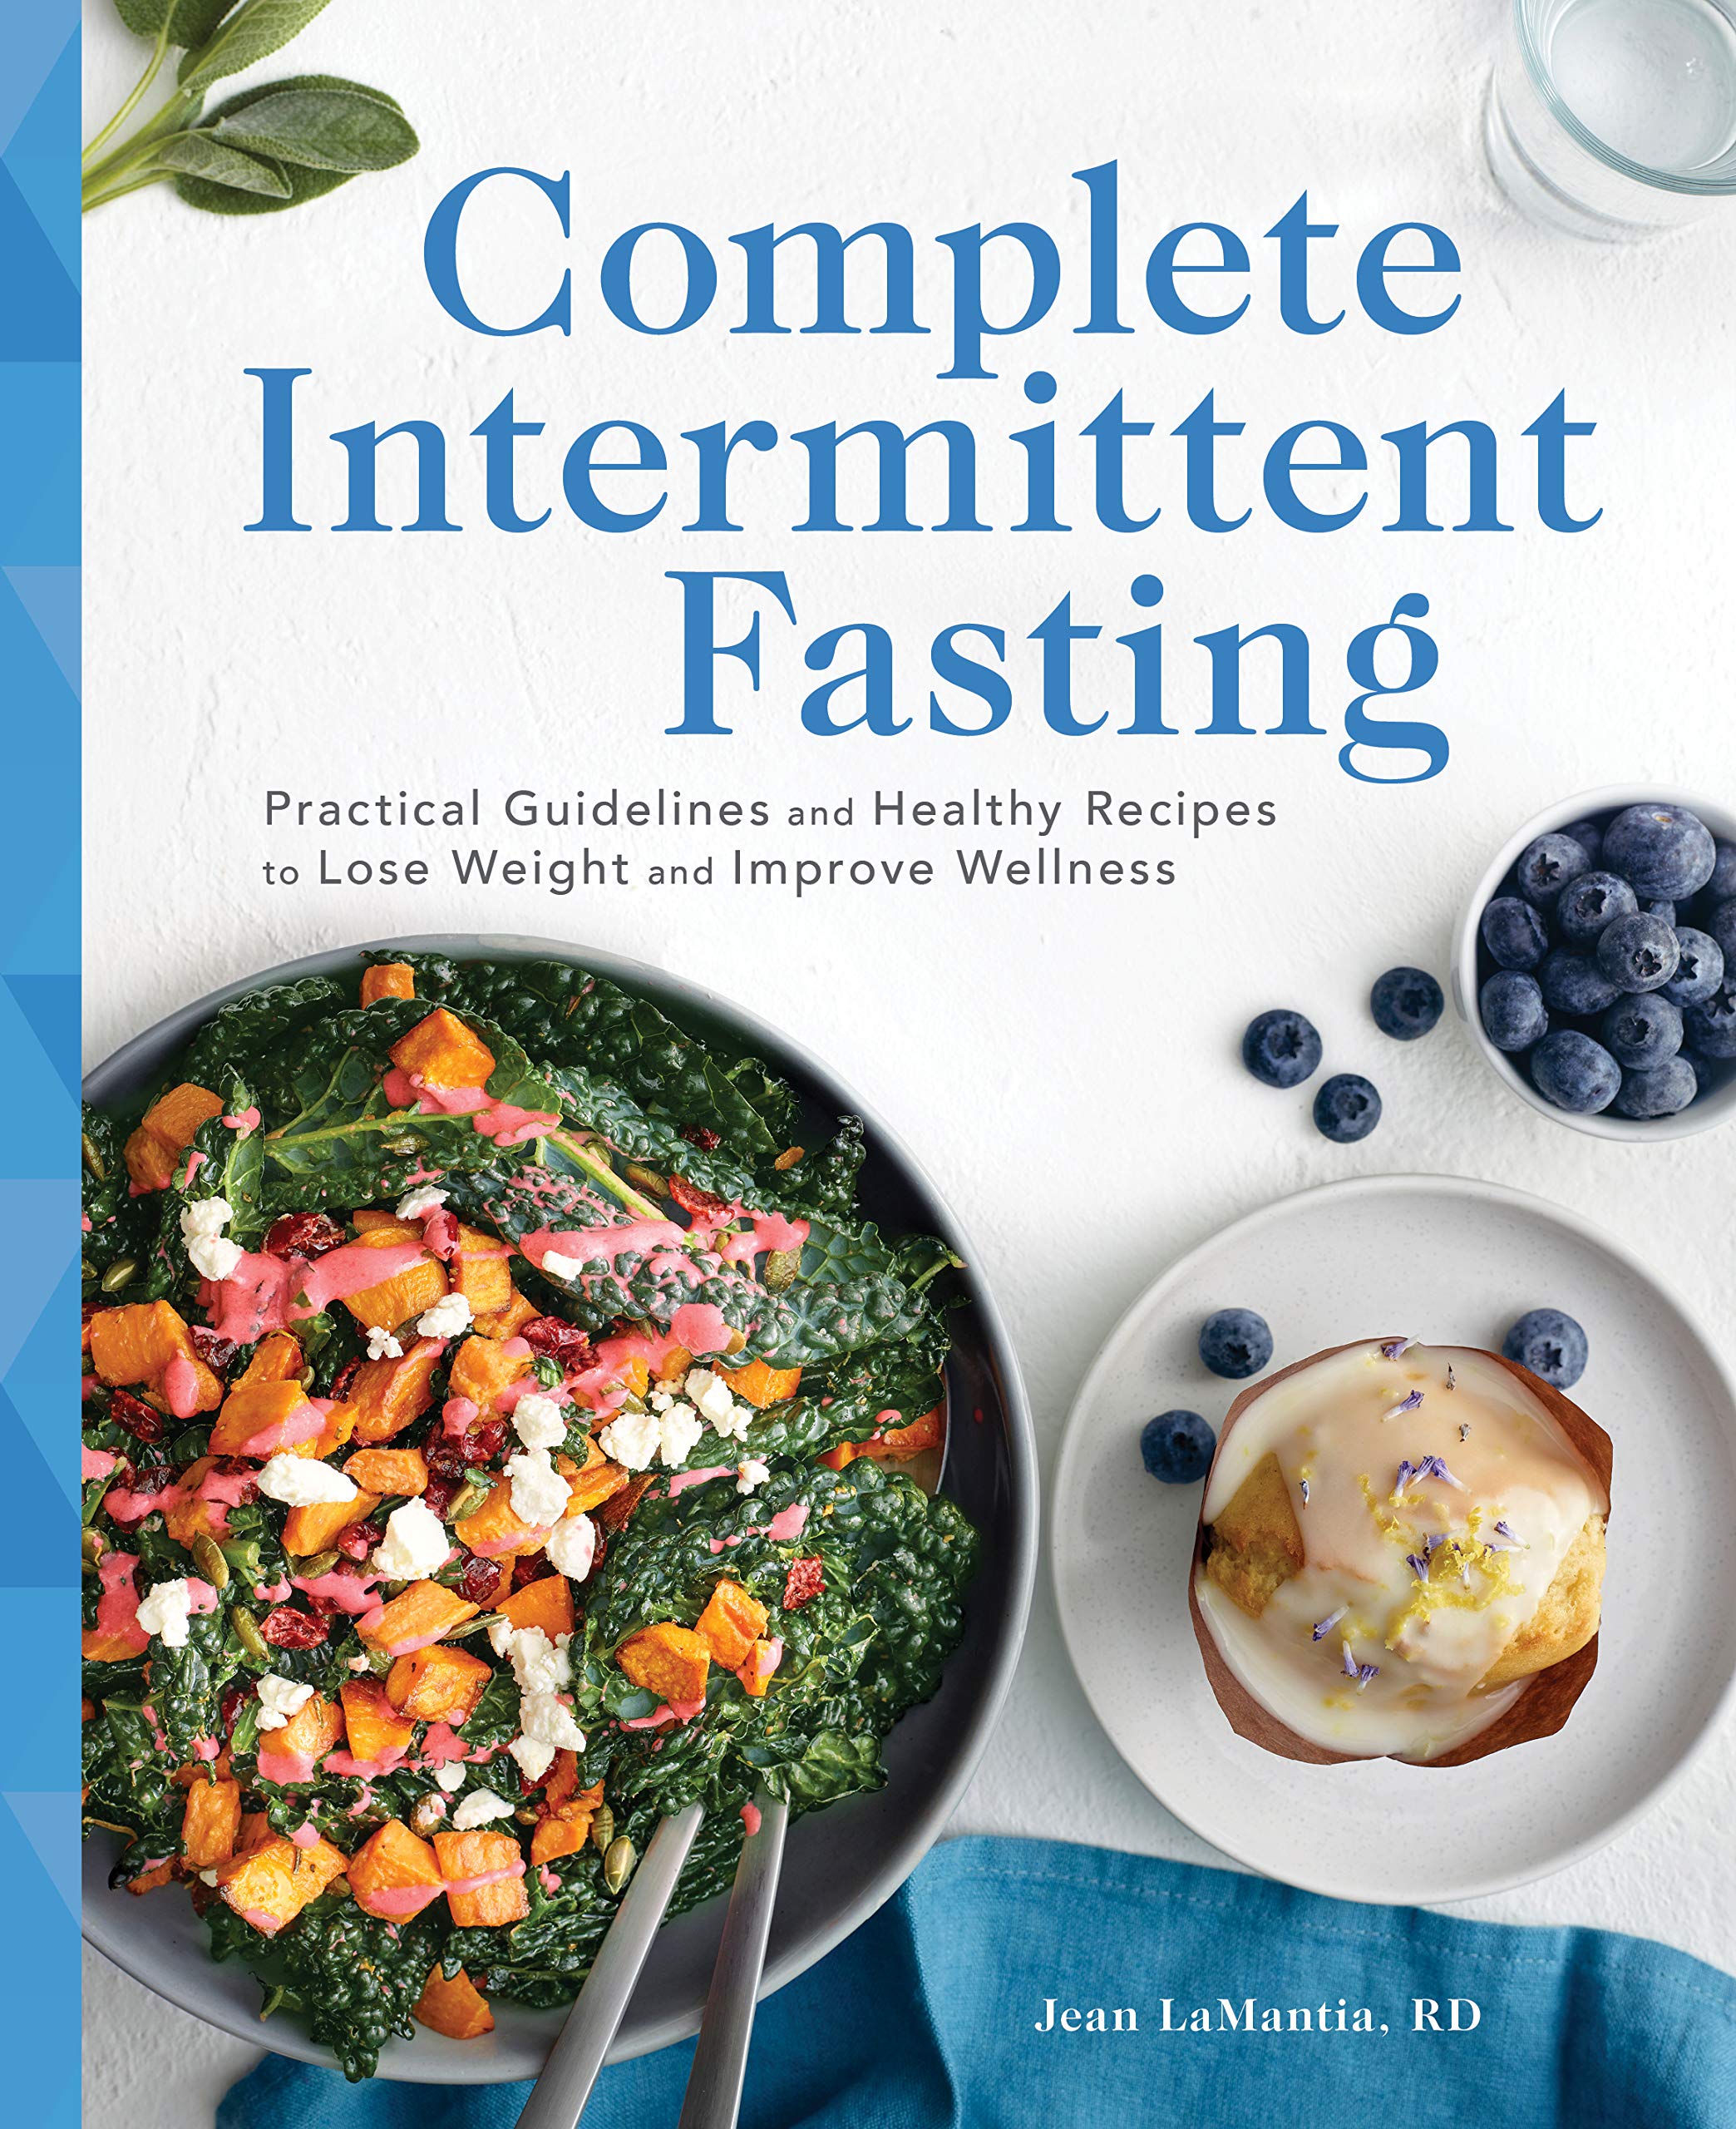 Complete Intermittent Fasting: Practical Guidelines and Healthy Recipes to Lose Weight and Improve Wellness